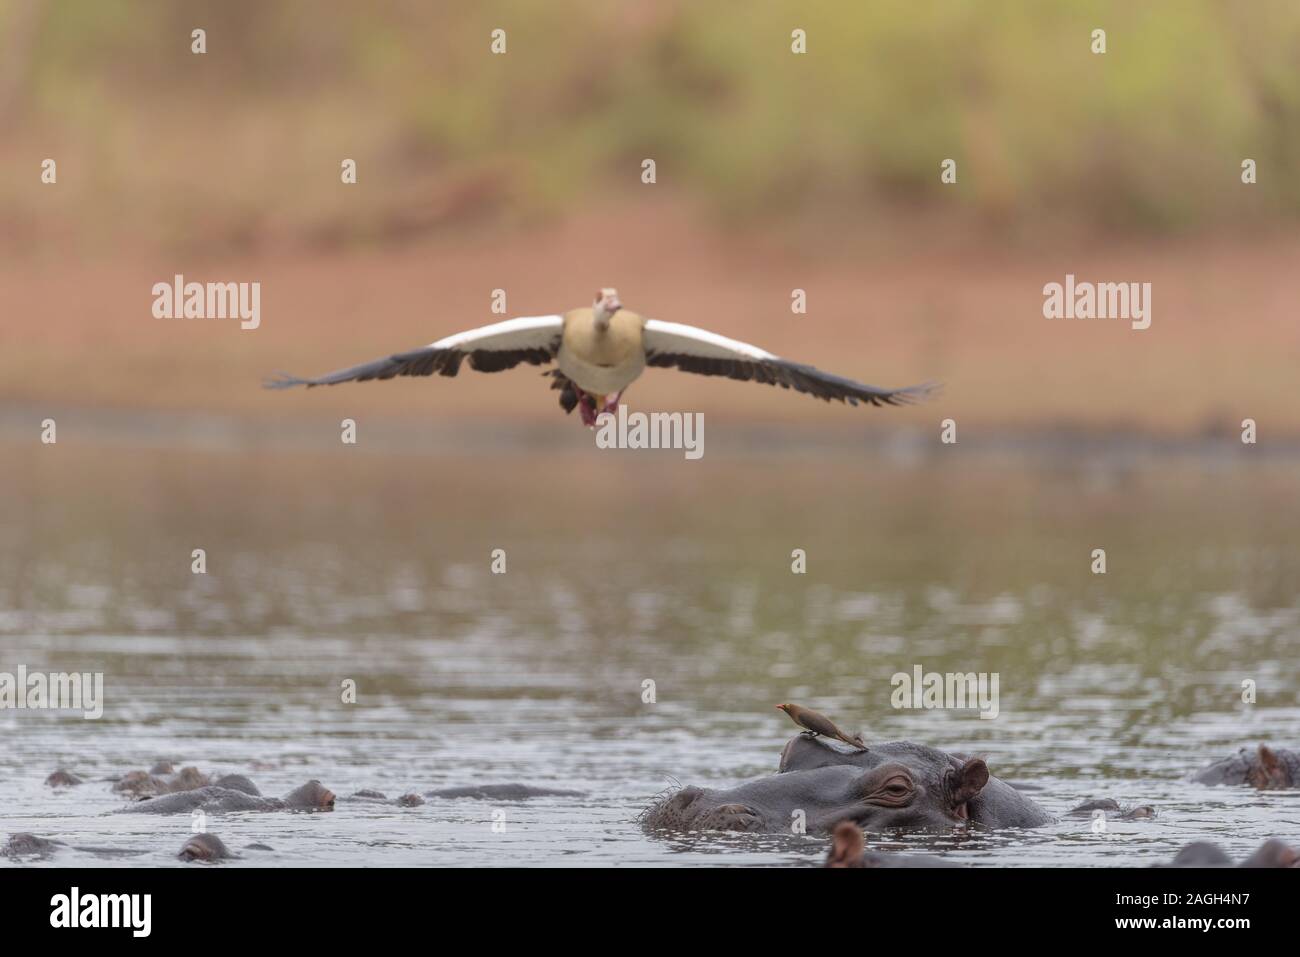 Selective focus shot of a bird flying above hippopotamuses in the water Stock Photo